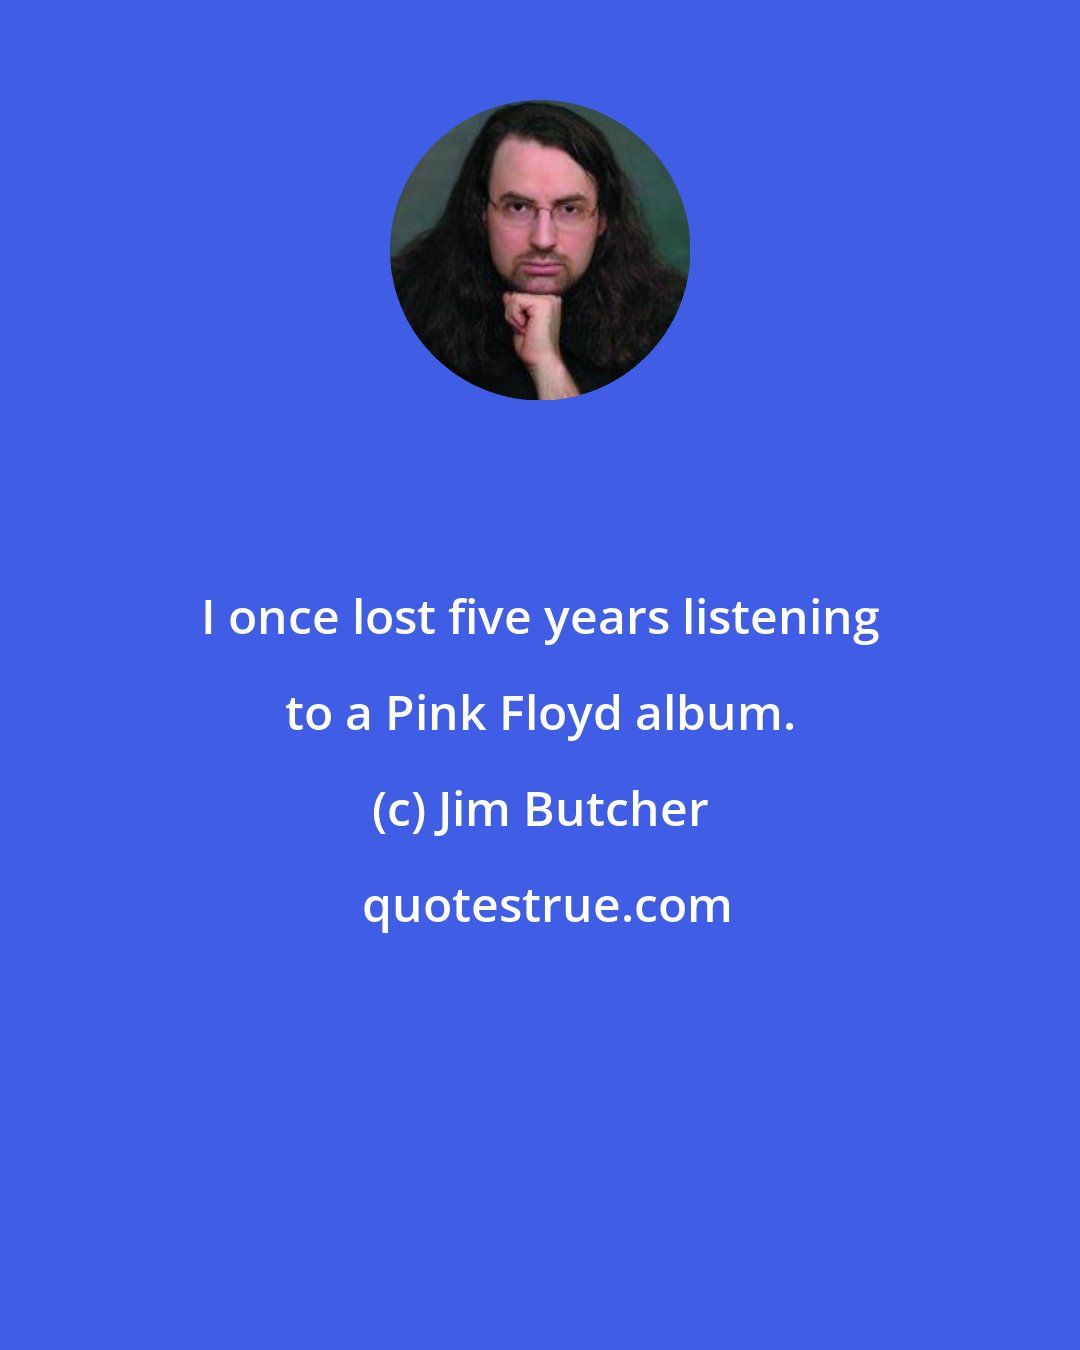 Jim Butcher: I once lost five years listening to a Pink Floyd album.